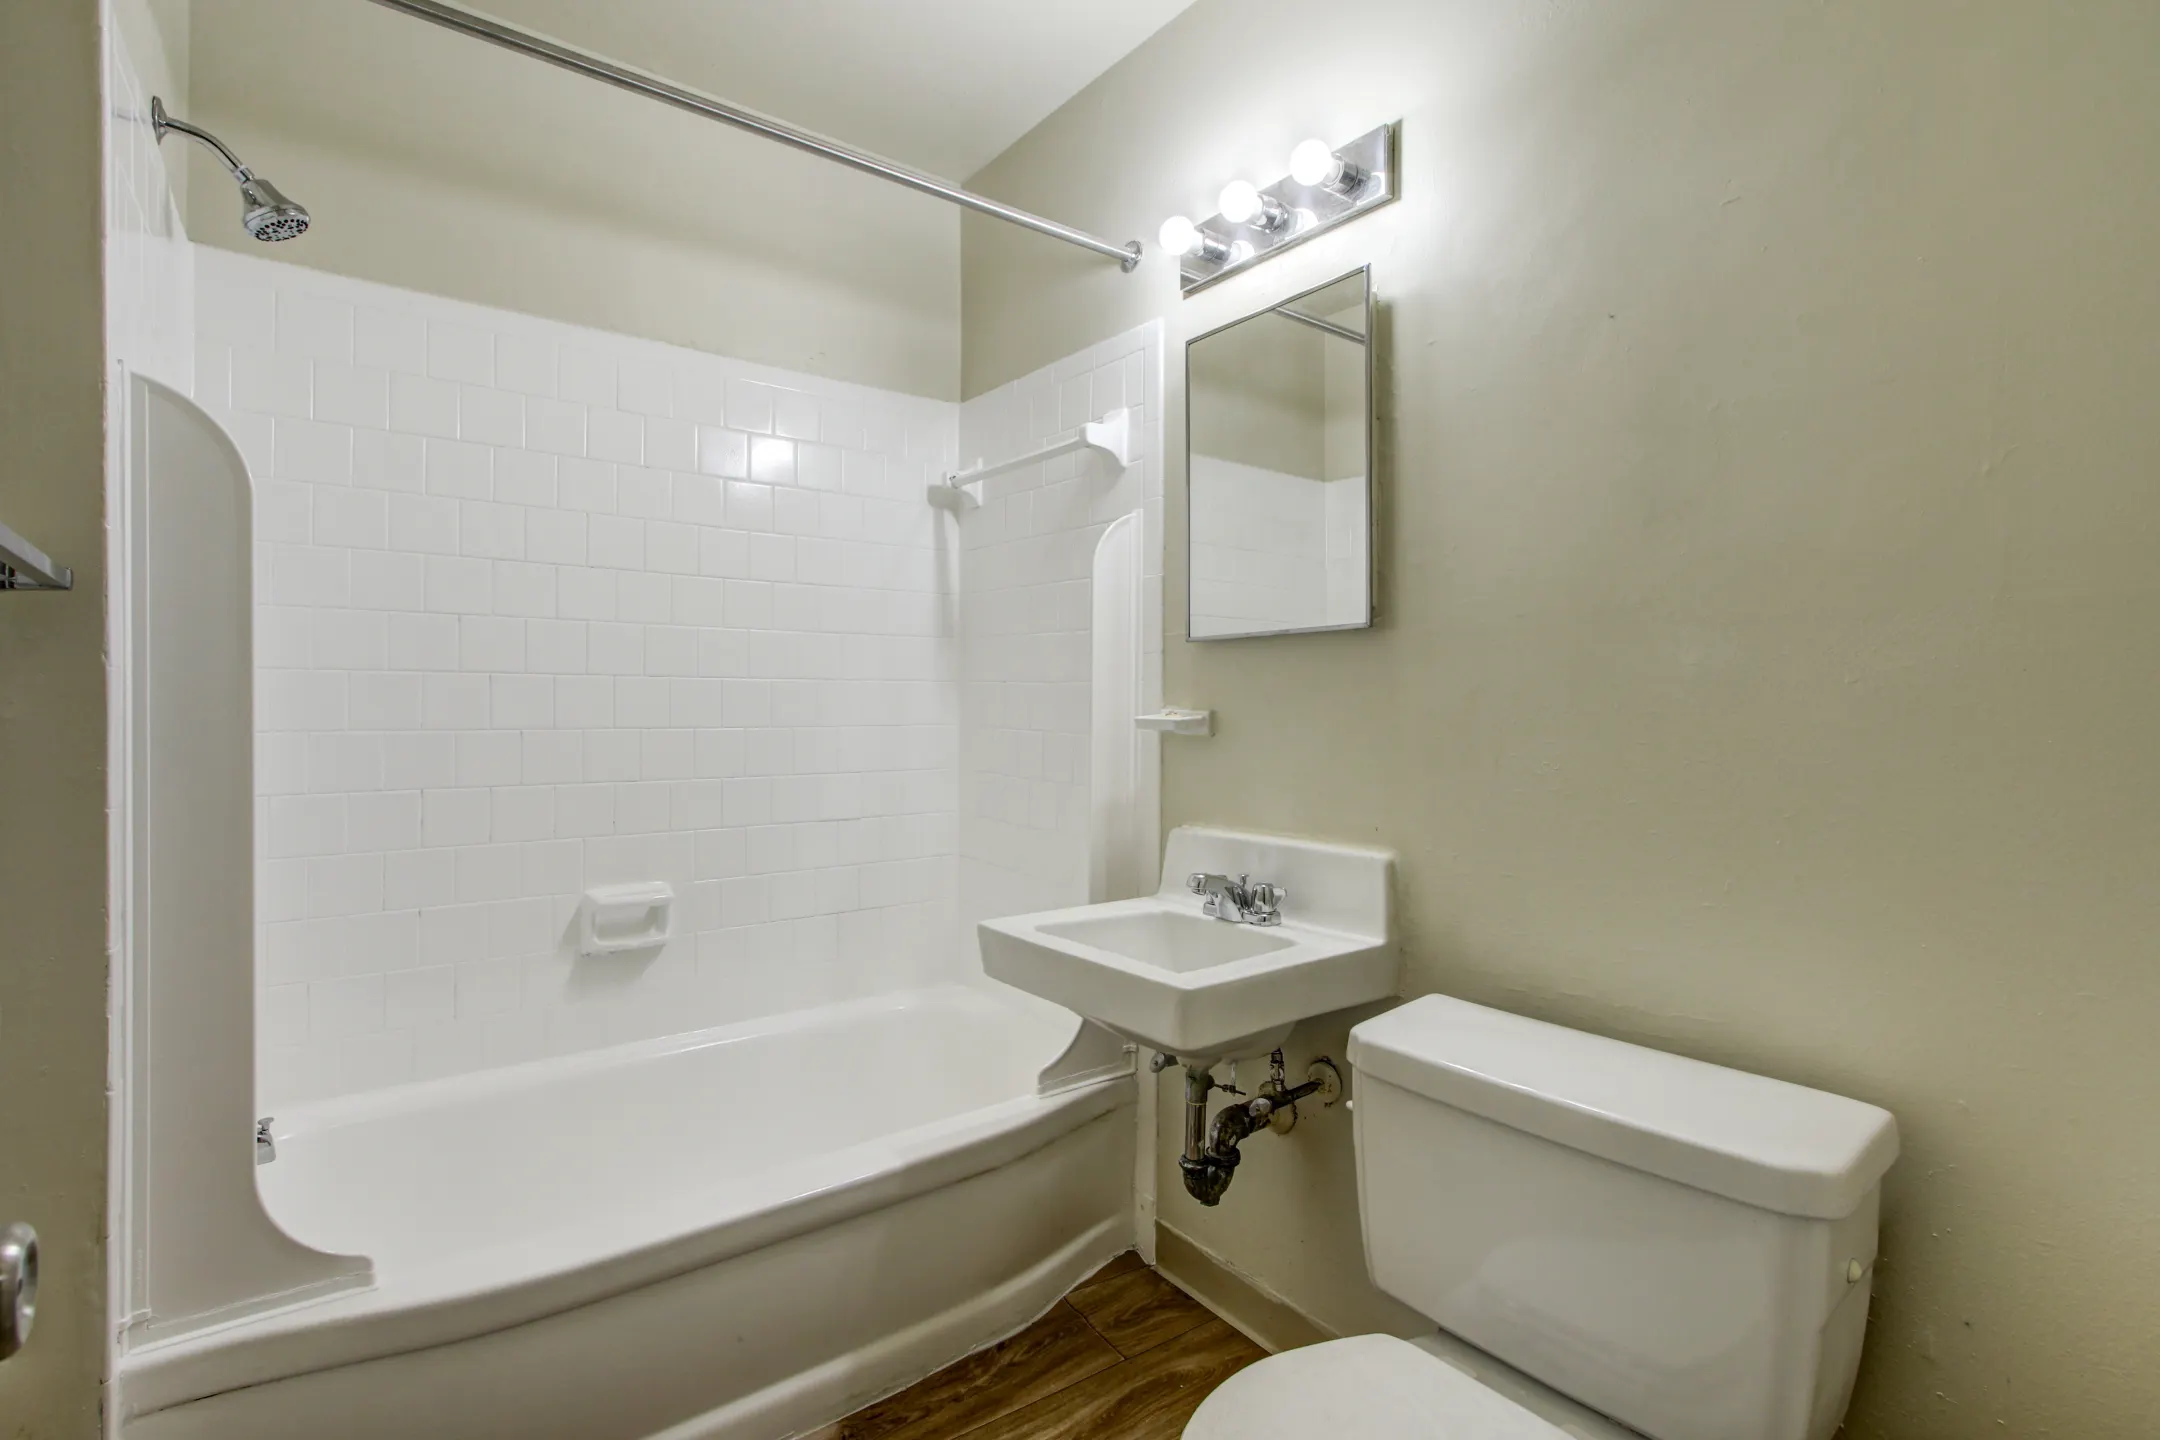 Bathroom - Avenue Apartments - District Heights, MD